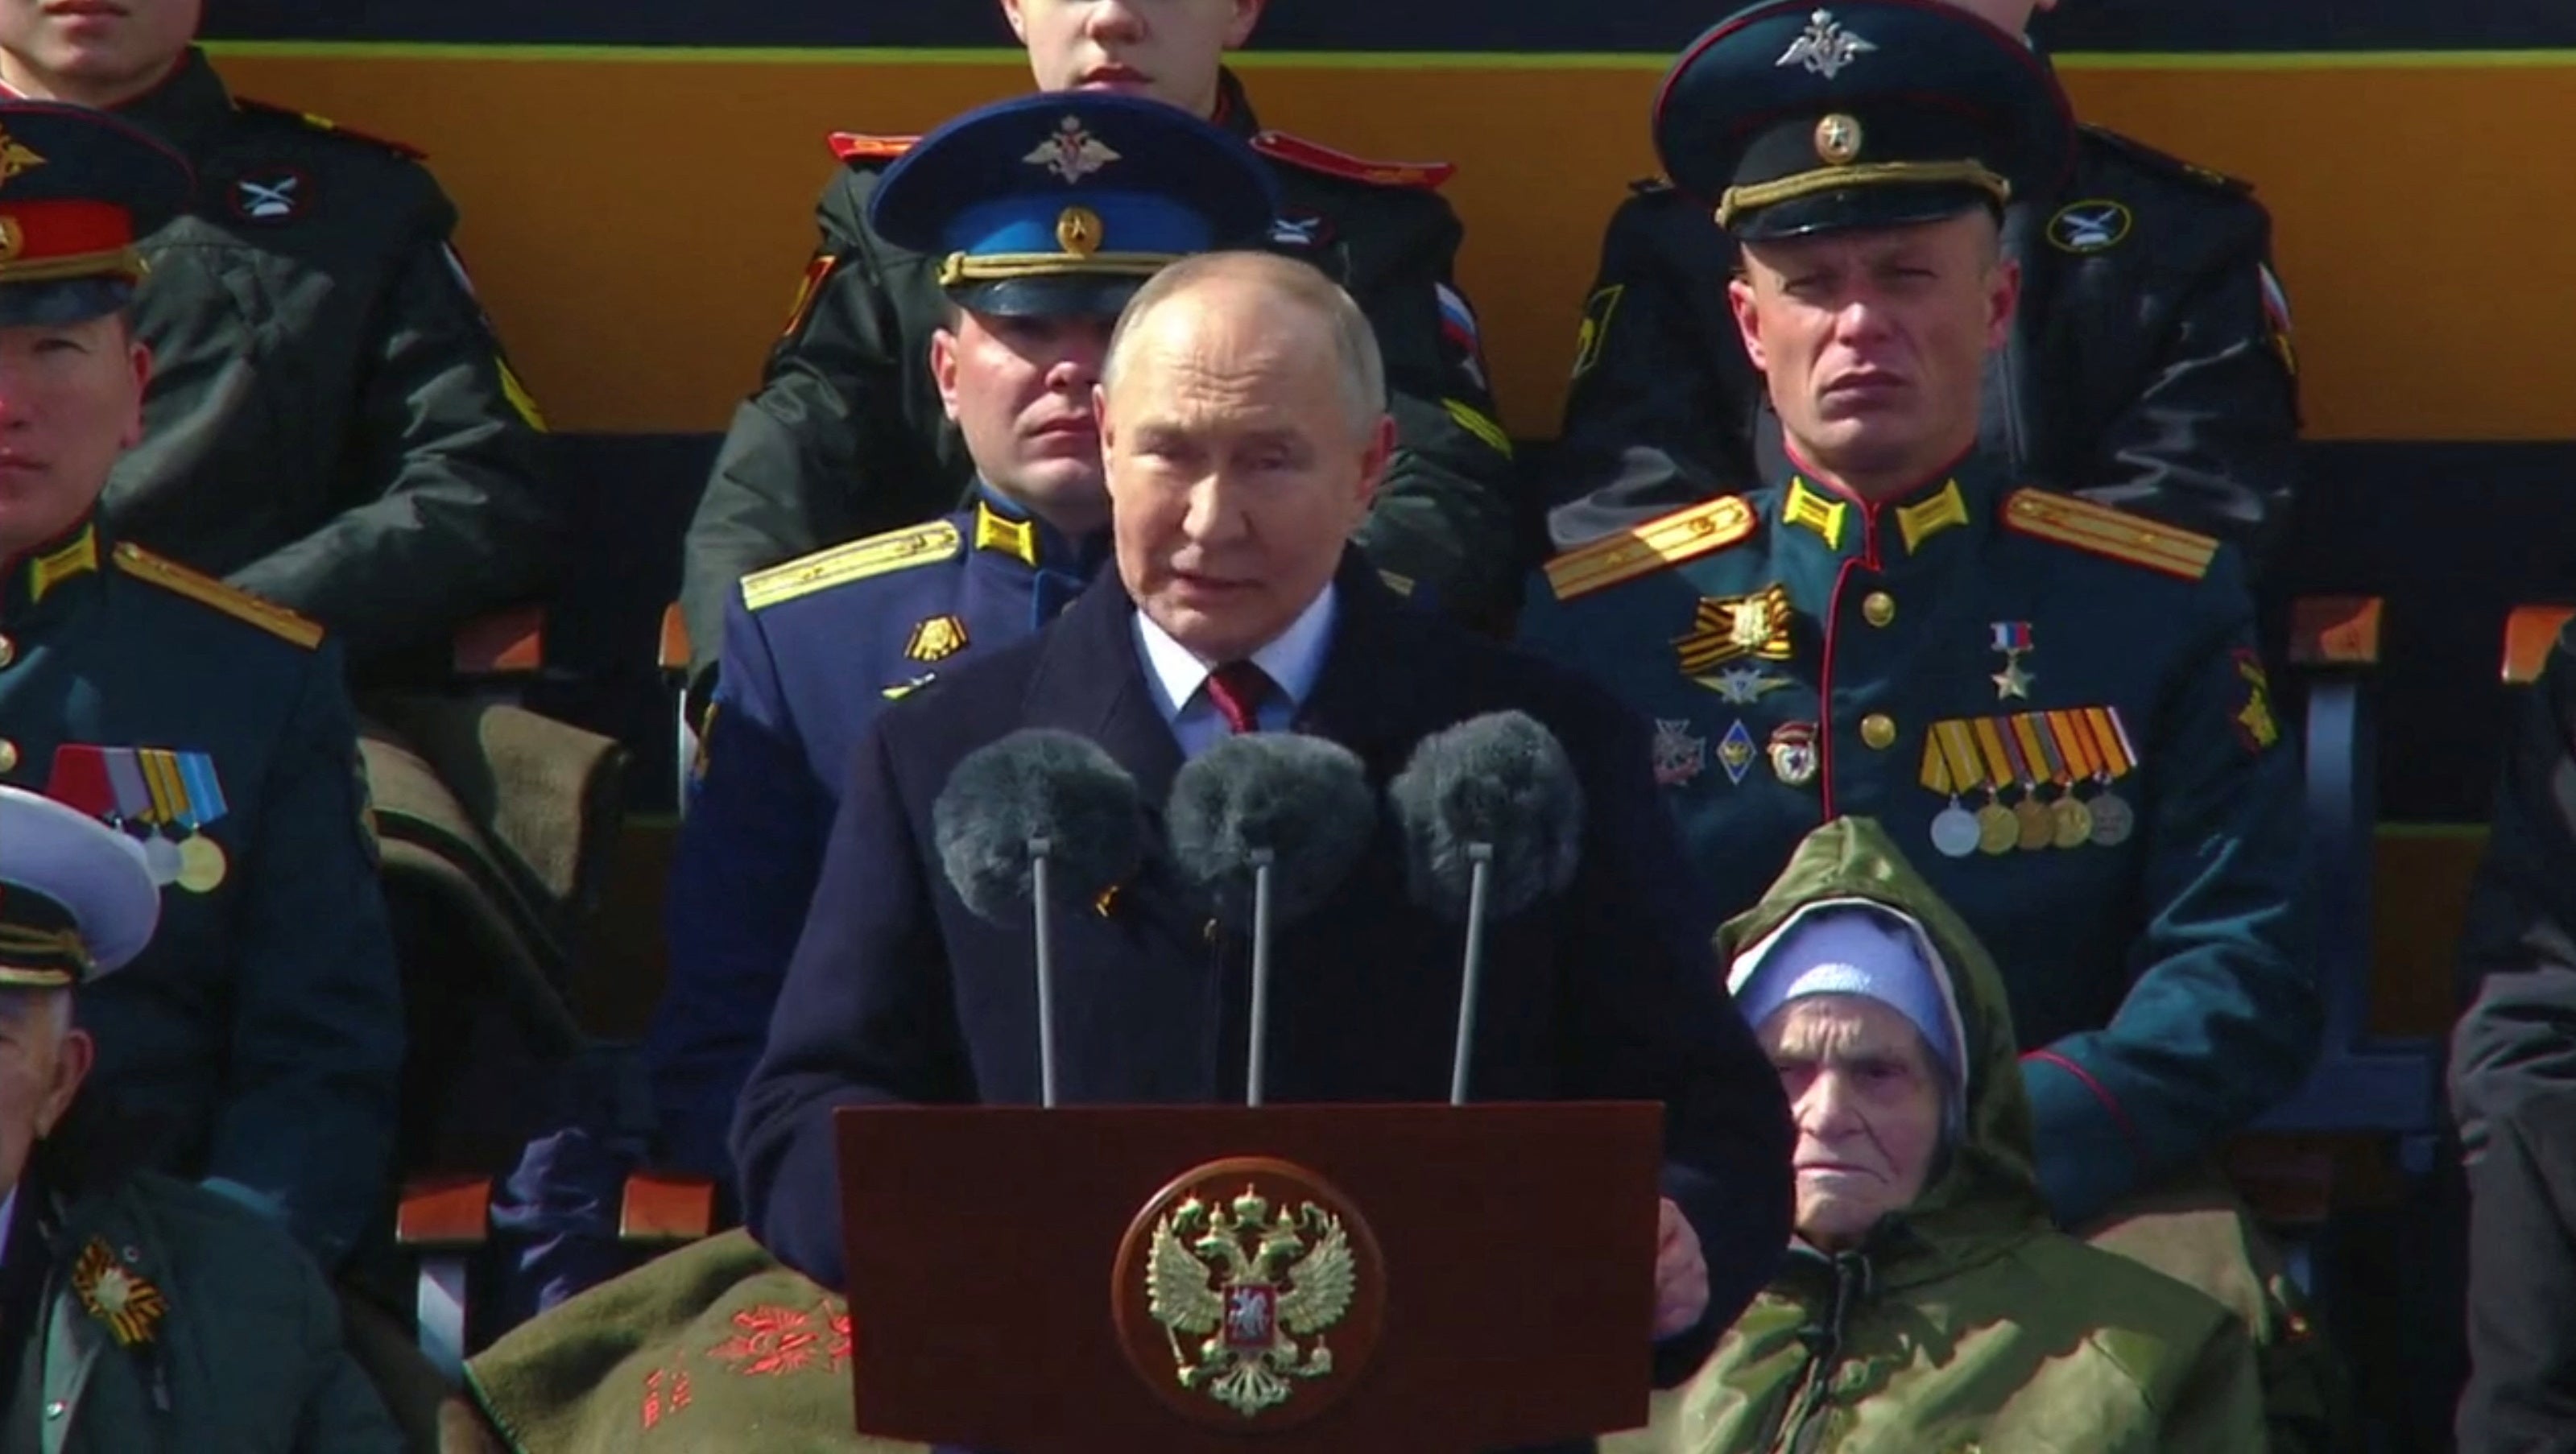 Vladimir Putin concedes in his speech that this is a ‘difficult period’ for his country